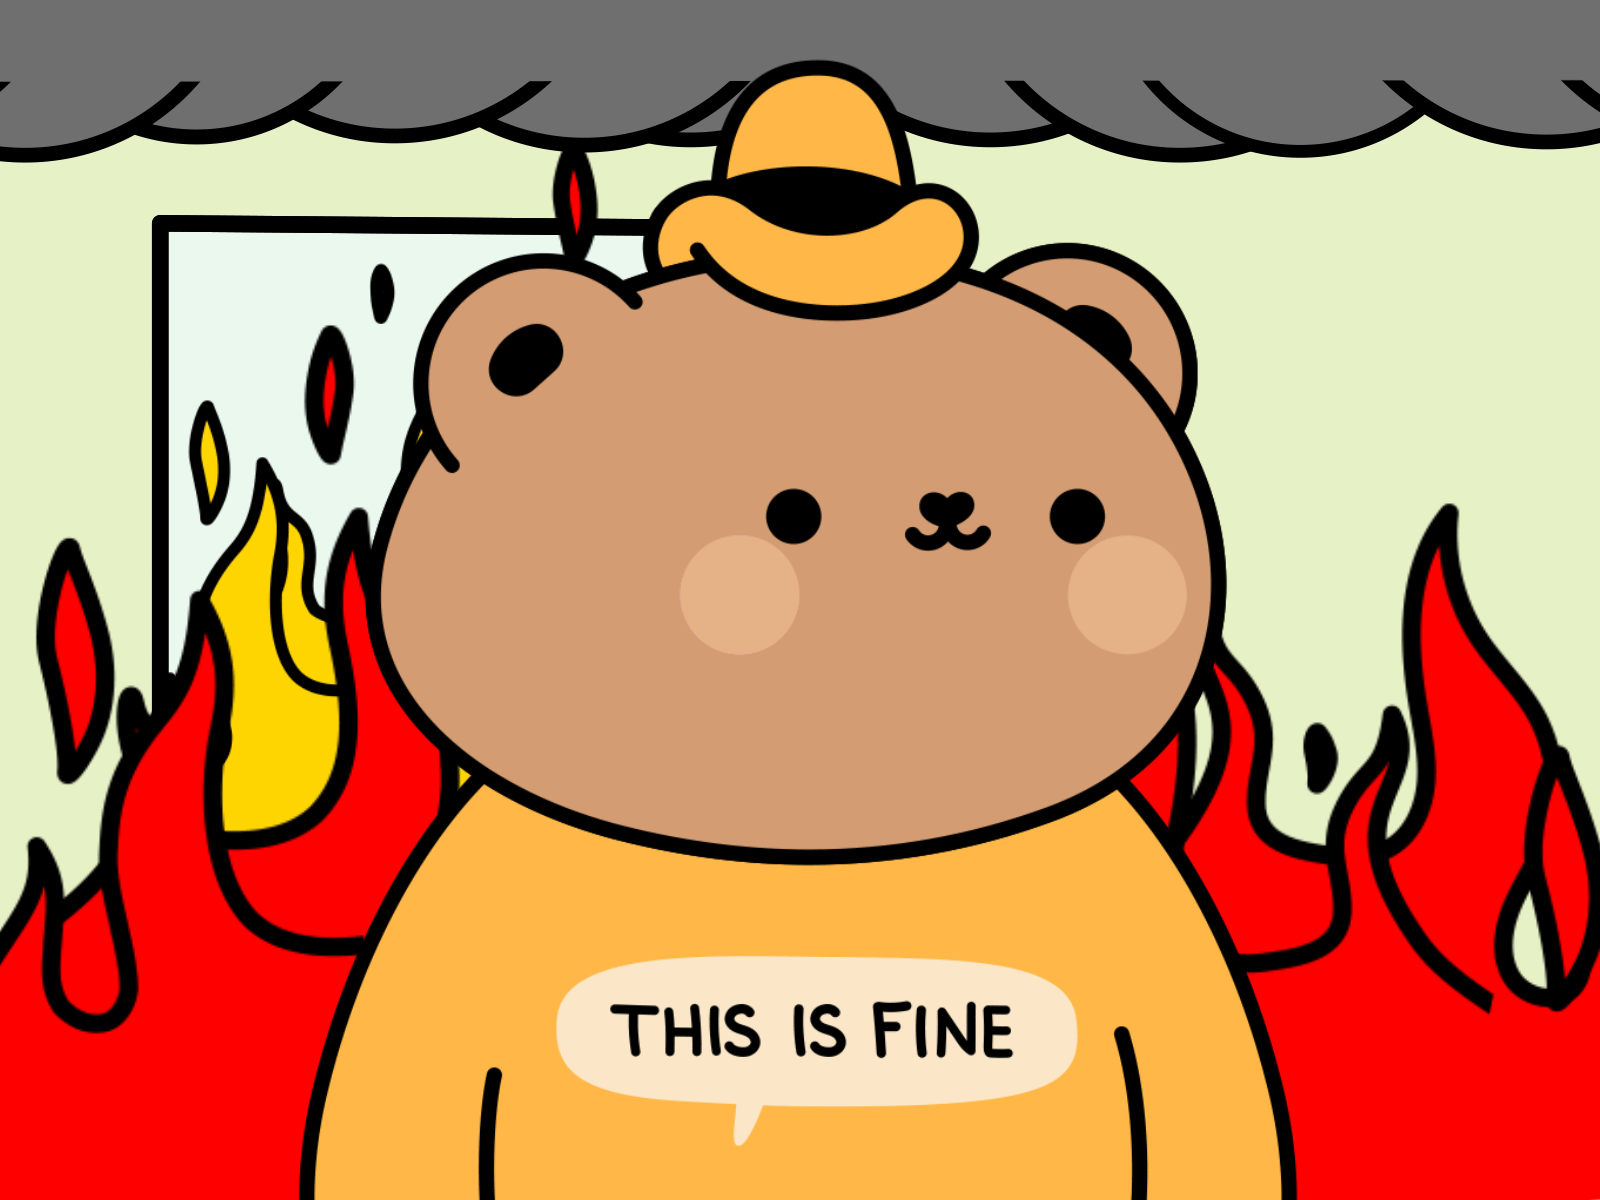 This Is Fine Dog Posters for Sale